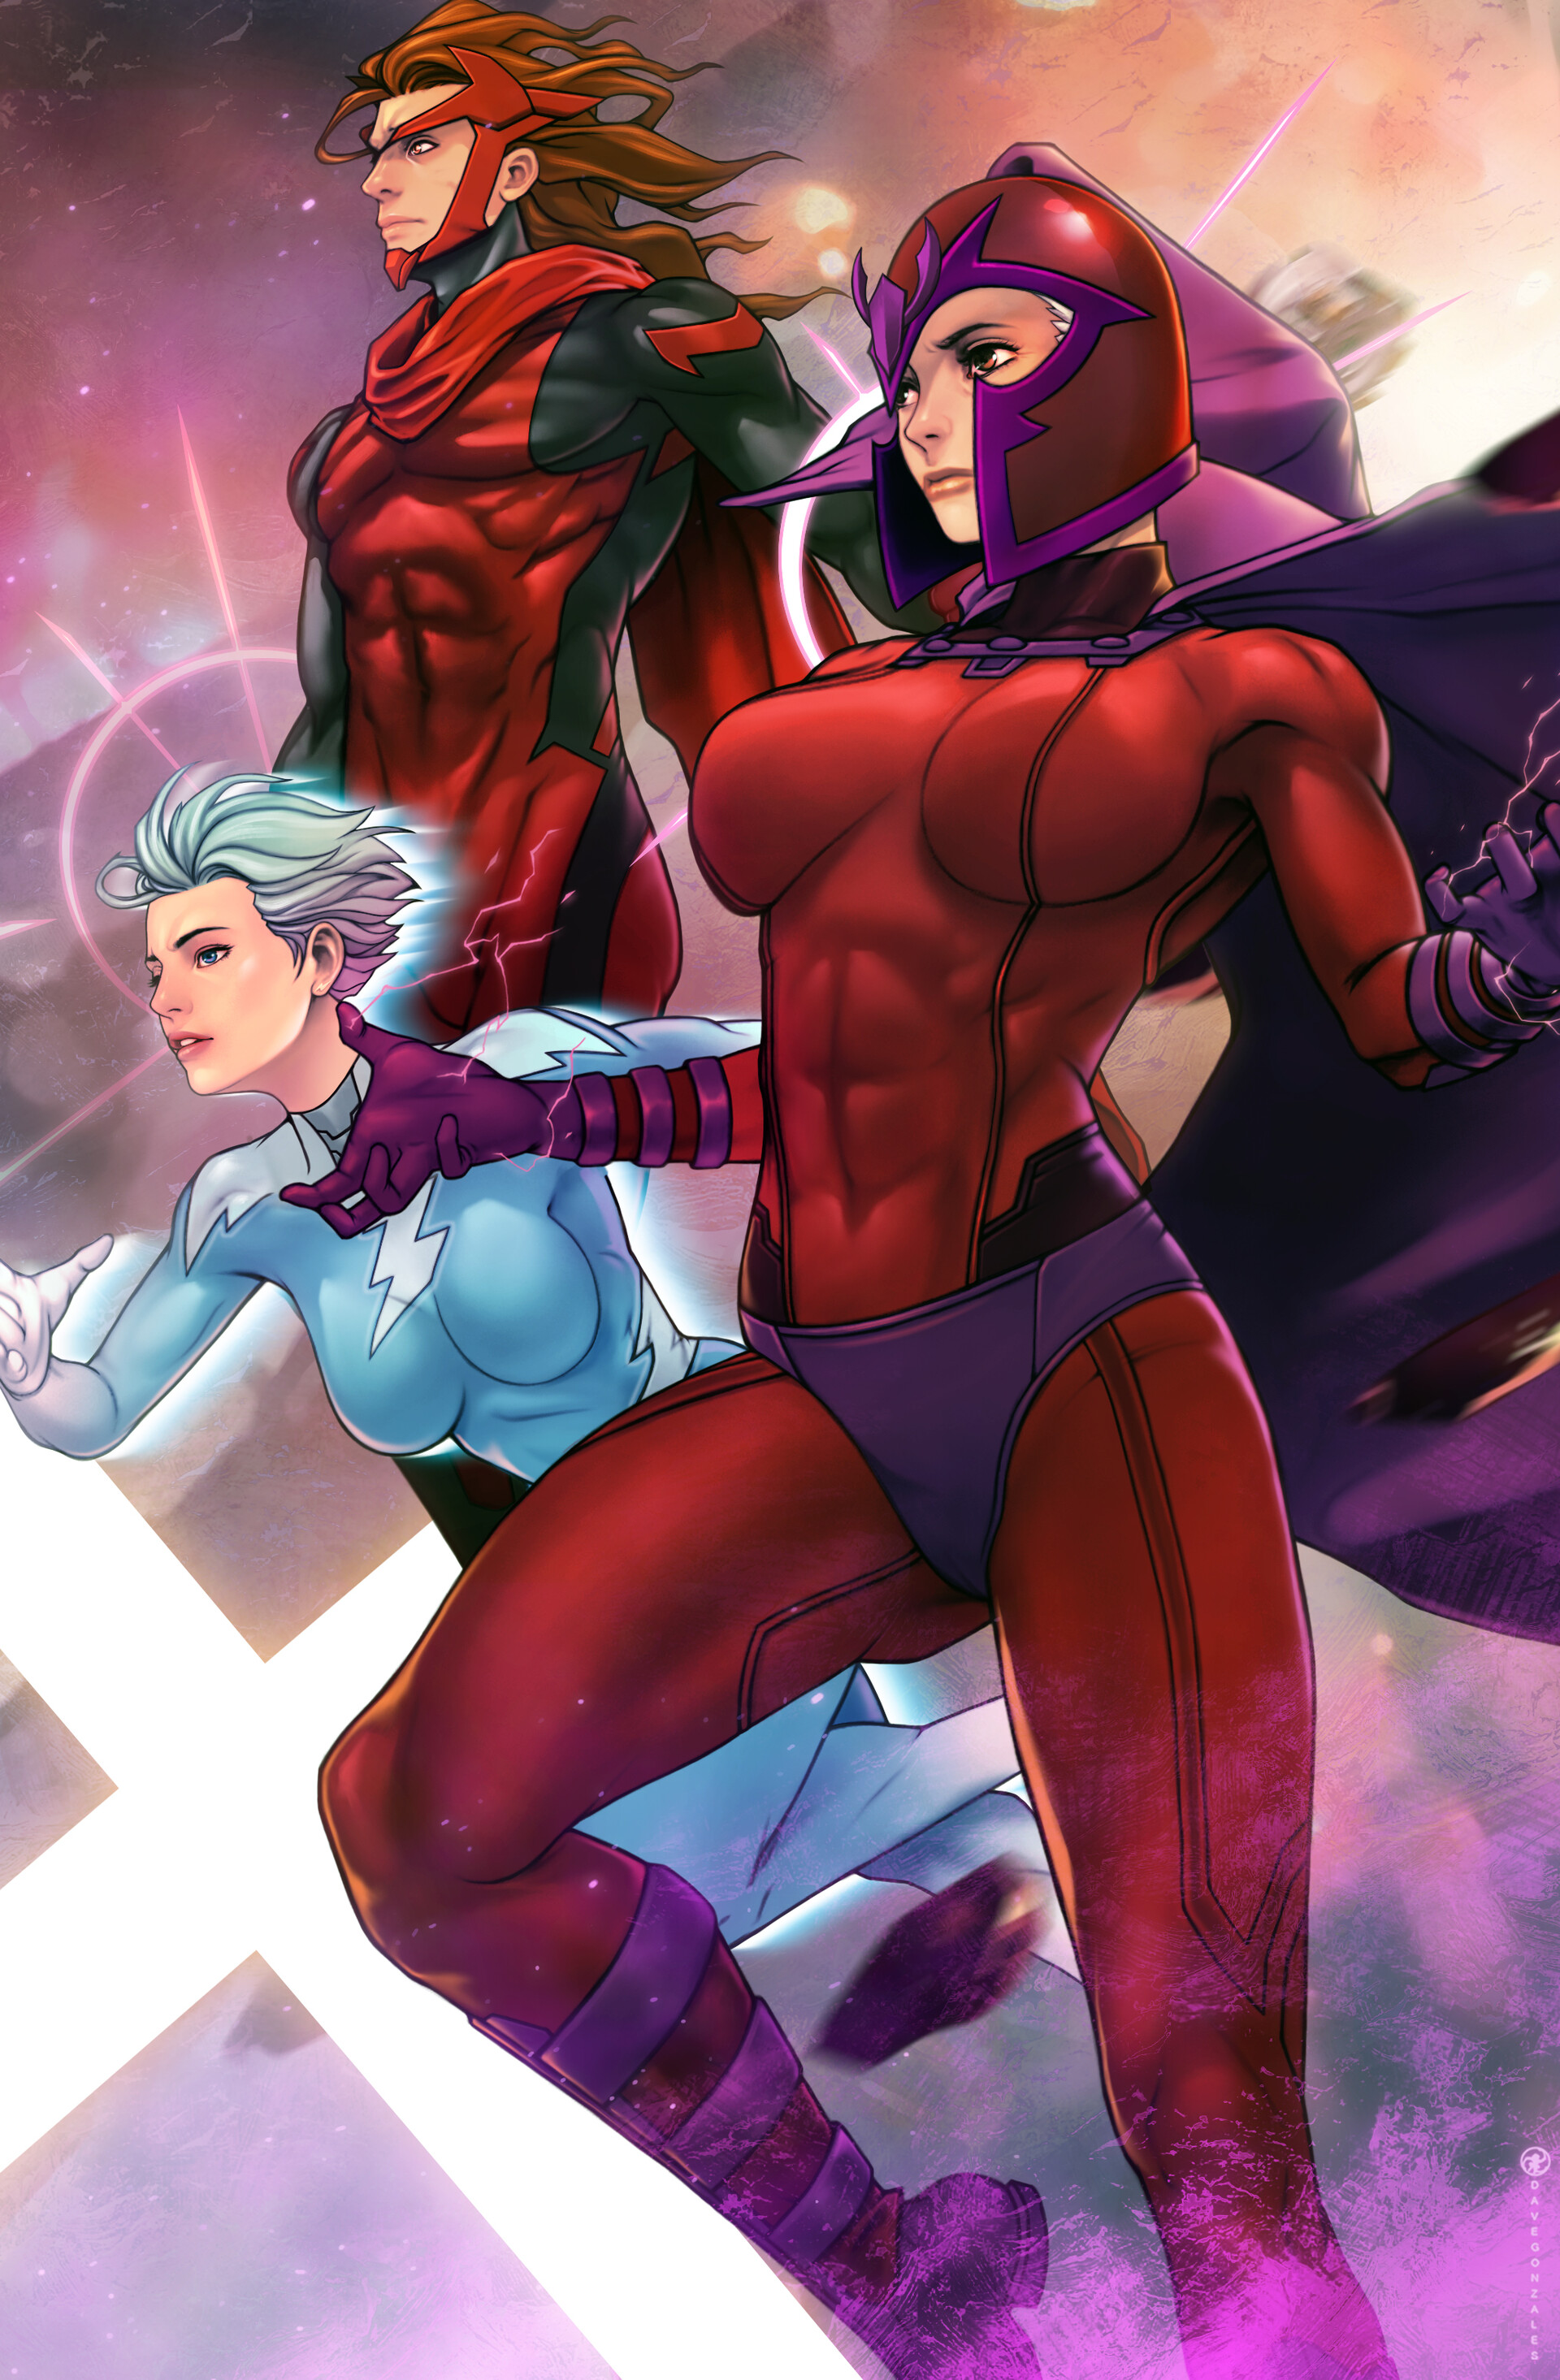 Quicksilver and Scarlett Witch – Who Are They?